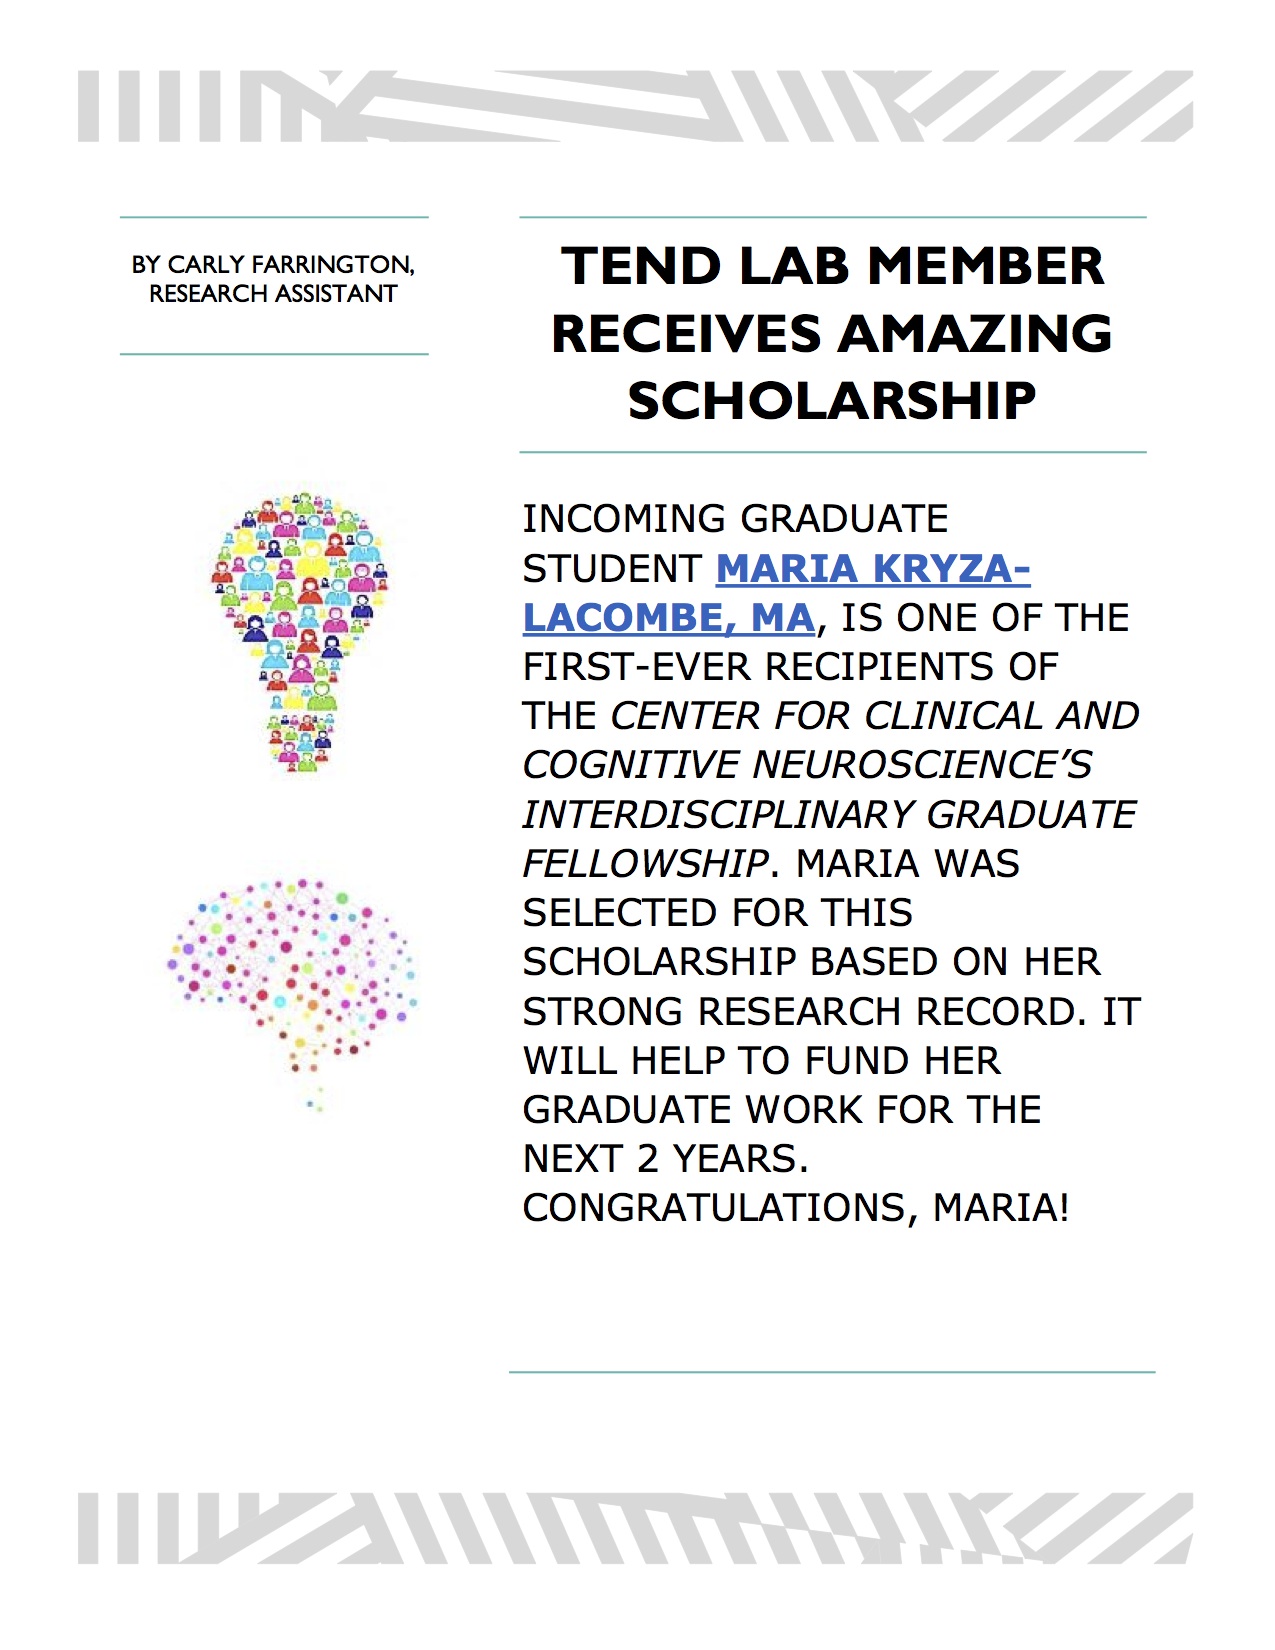 Scholarship article page 1 titled "TEND Lab Member Receives Amazing Scholarship"